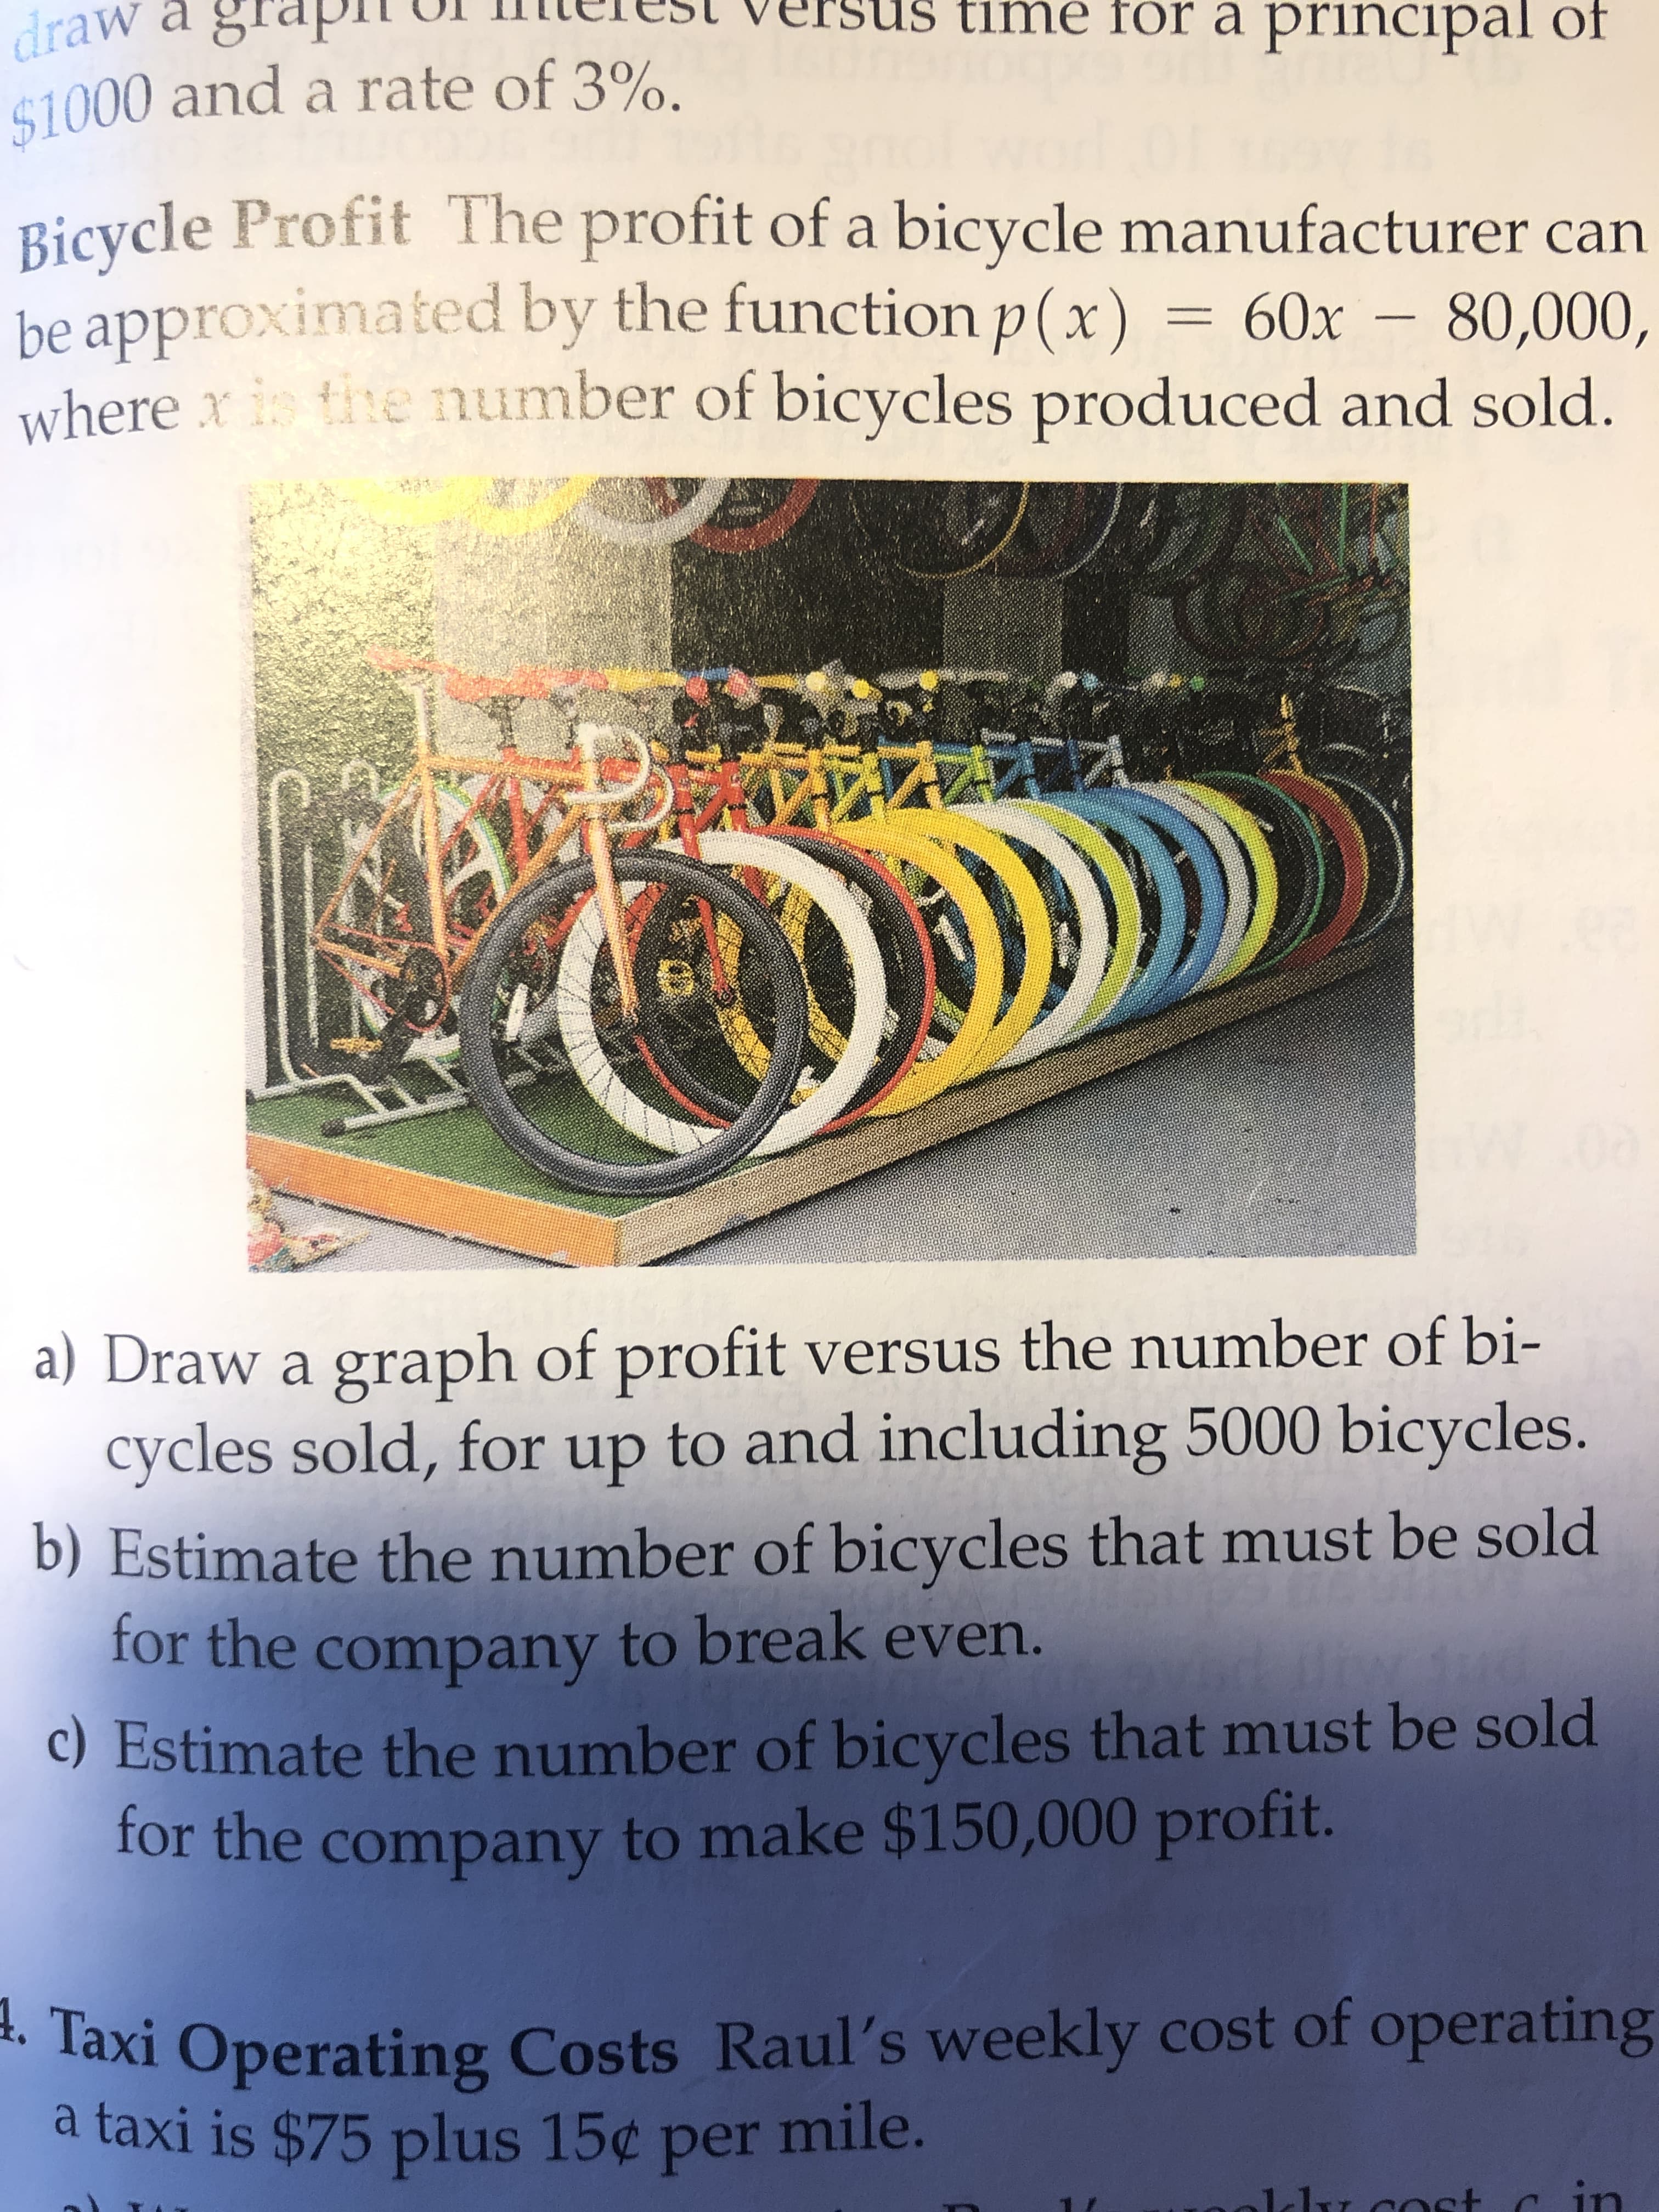 dra
aw a
timé fór a principal of
$1000 and a rate of 3%.
Bicycle Profit The profit of a bicycle manufacturer can
be approximated by the functionp(x) = 60x
where x is tihe number of bicycles produced and sold.
80,000,
%3D
a) Draw a graph of profit versus the number of bi-
cycles sold, for up to and including 5000 bicycles.
b) Estimate the number of bicycles that must be sold
for the company to break even.
c) Estimate the number of bicycles that must be sold
for the company to make $150,000 profit.
A. Taxi Operating Costs Raul's weekly cost of o
a taxi is $75 plus 15¢ per mile.
operating
ldu cost cin
